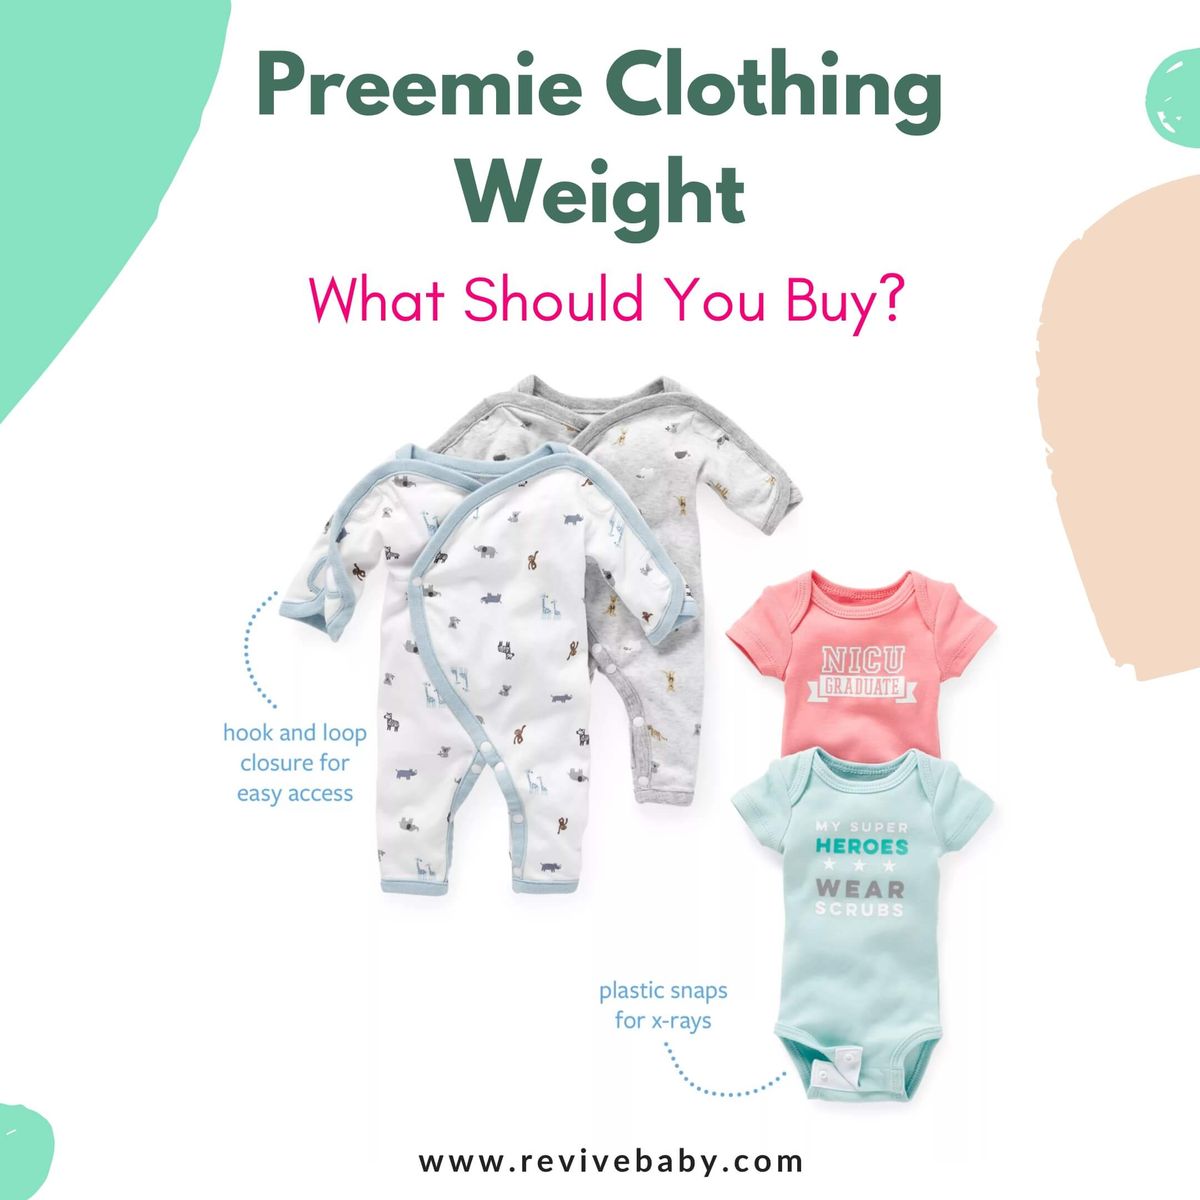 Preemie Clothing Weight - What Should You Buy